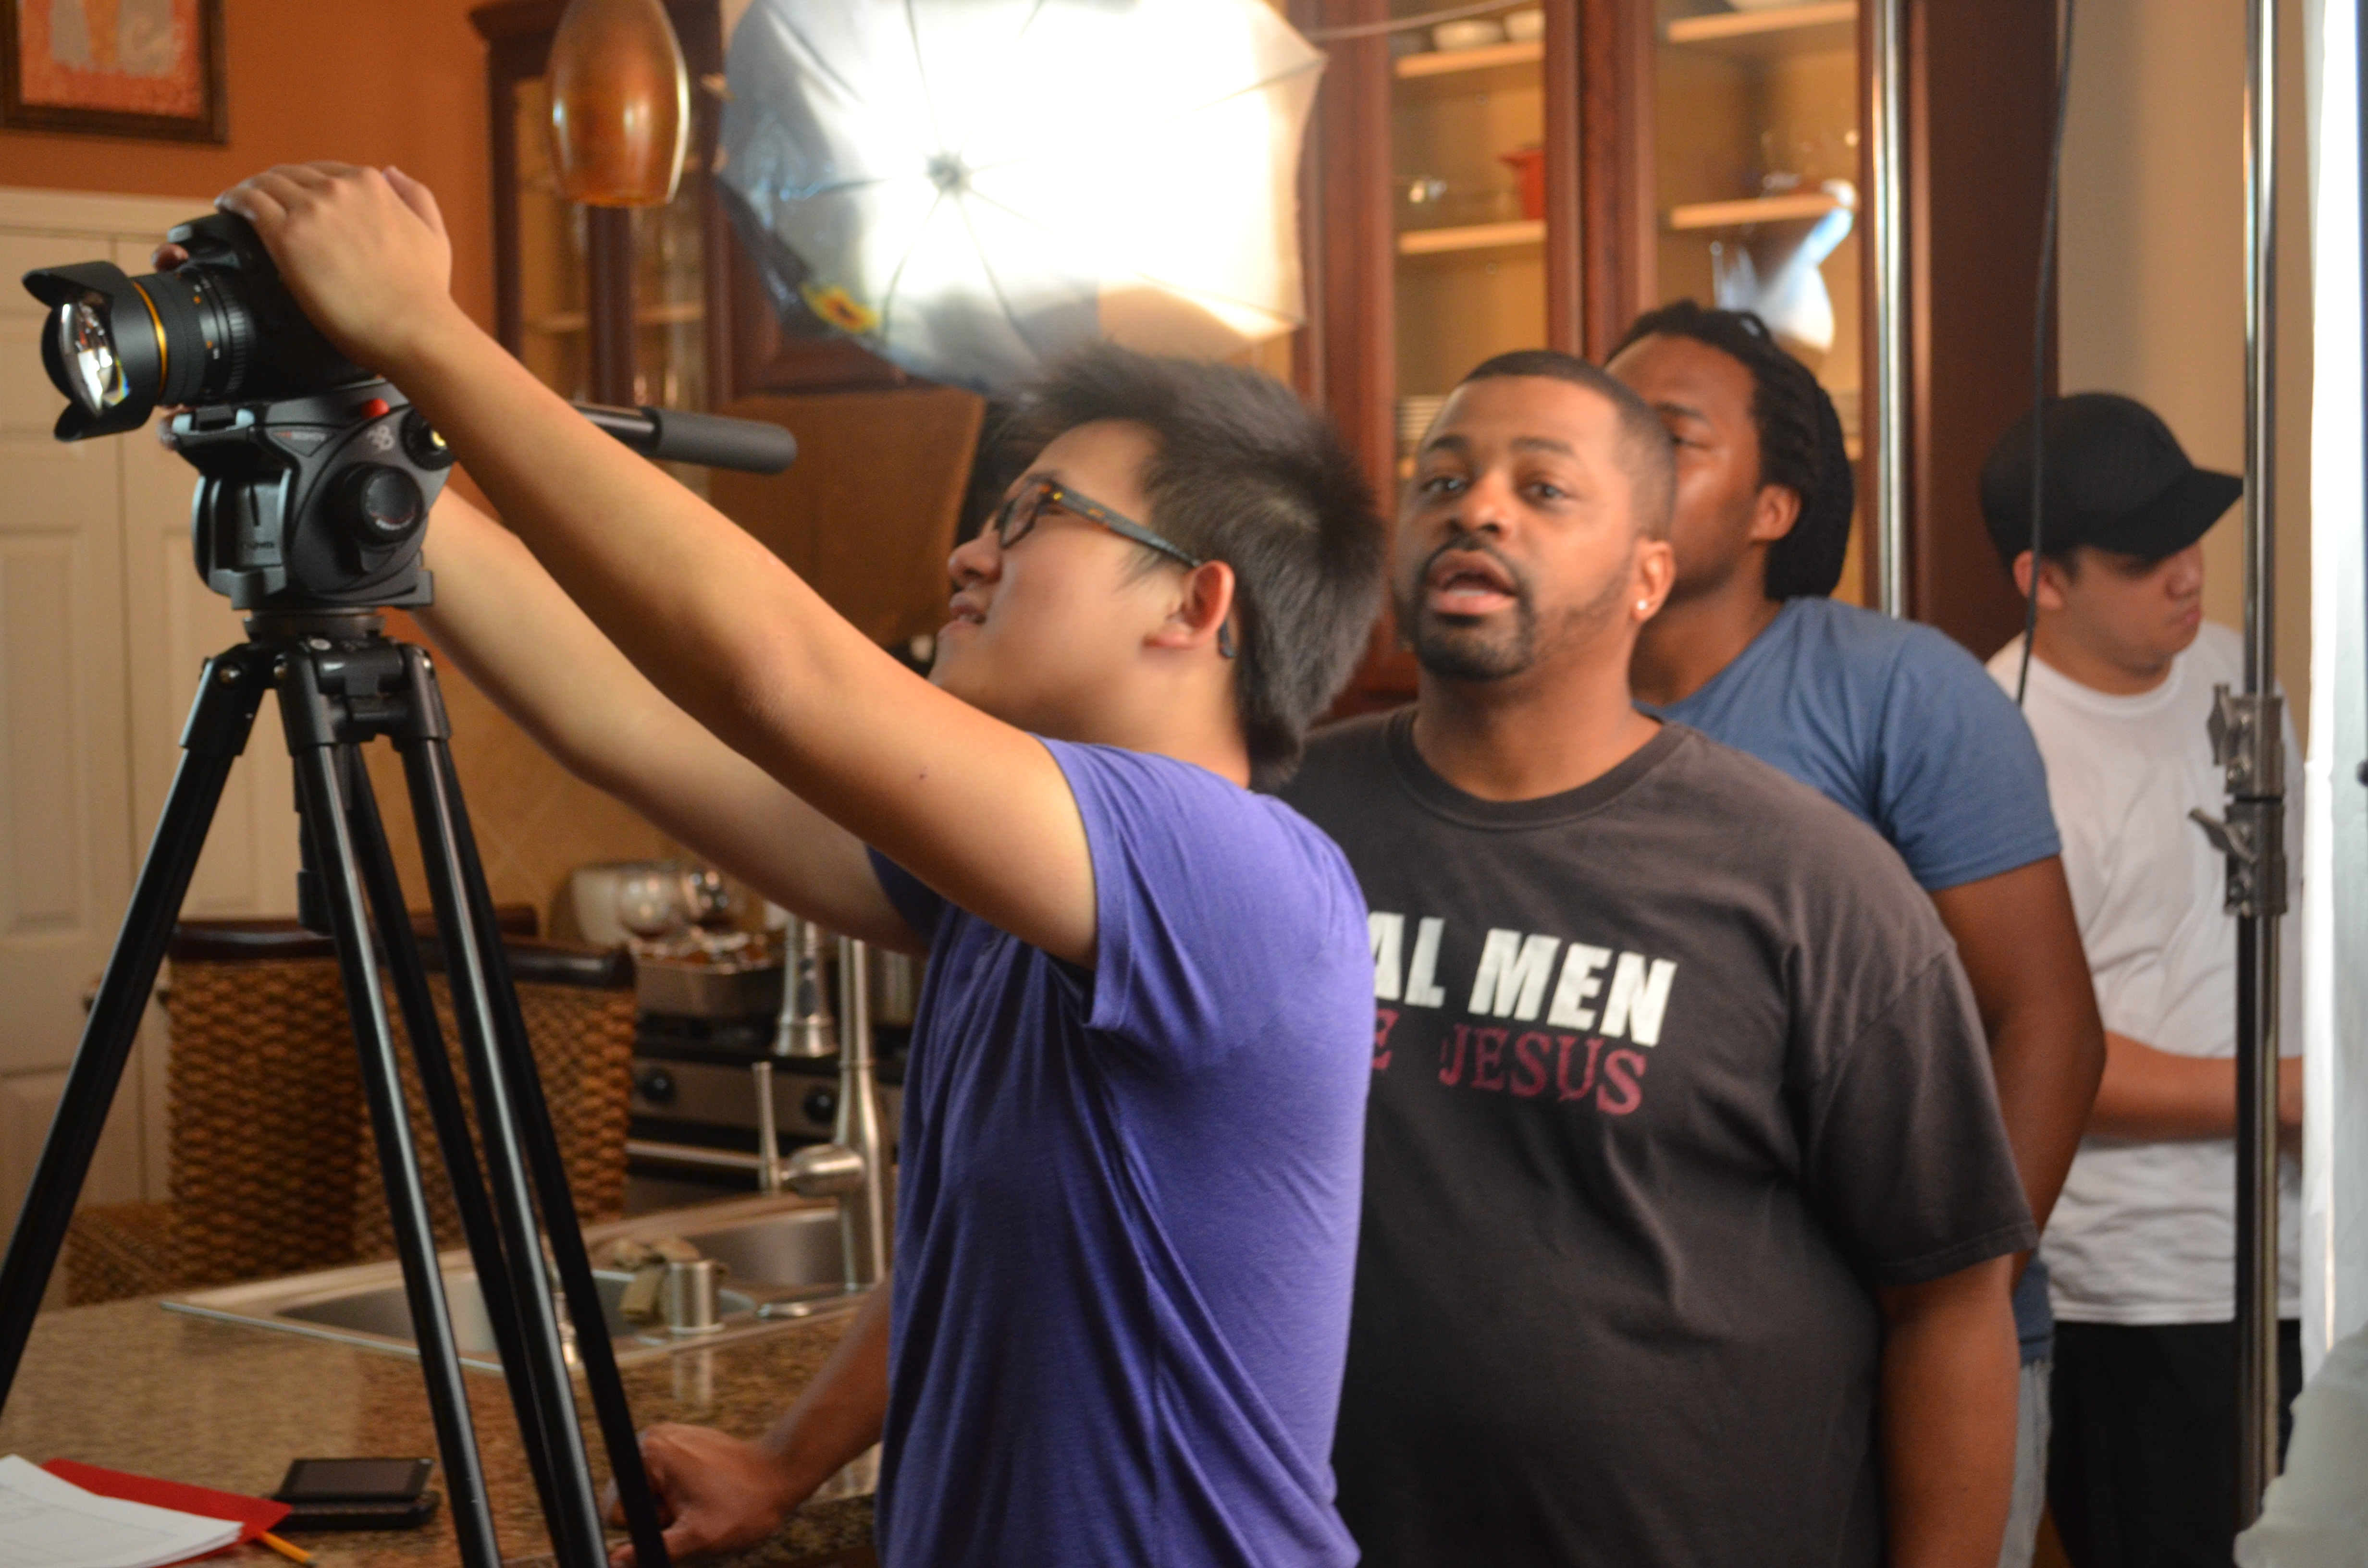 On the set of The Prank. Setting up the shot for the next scene.